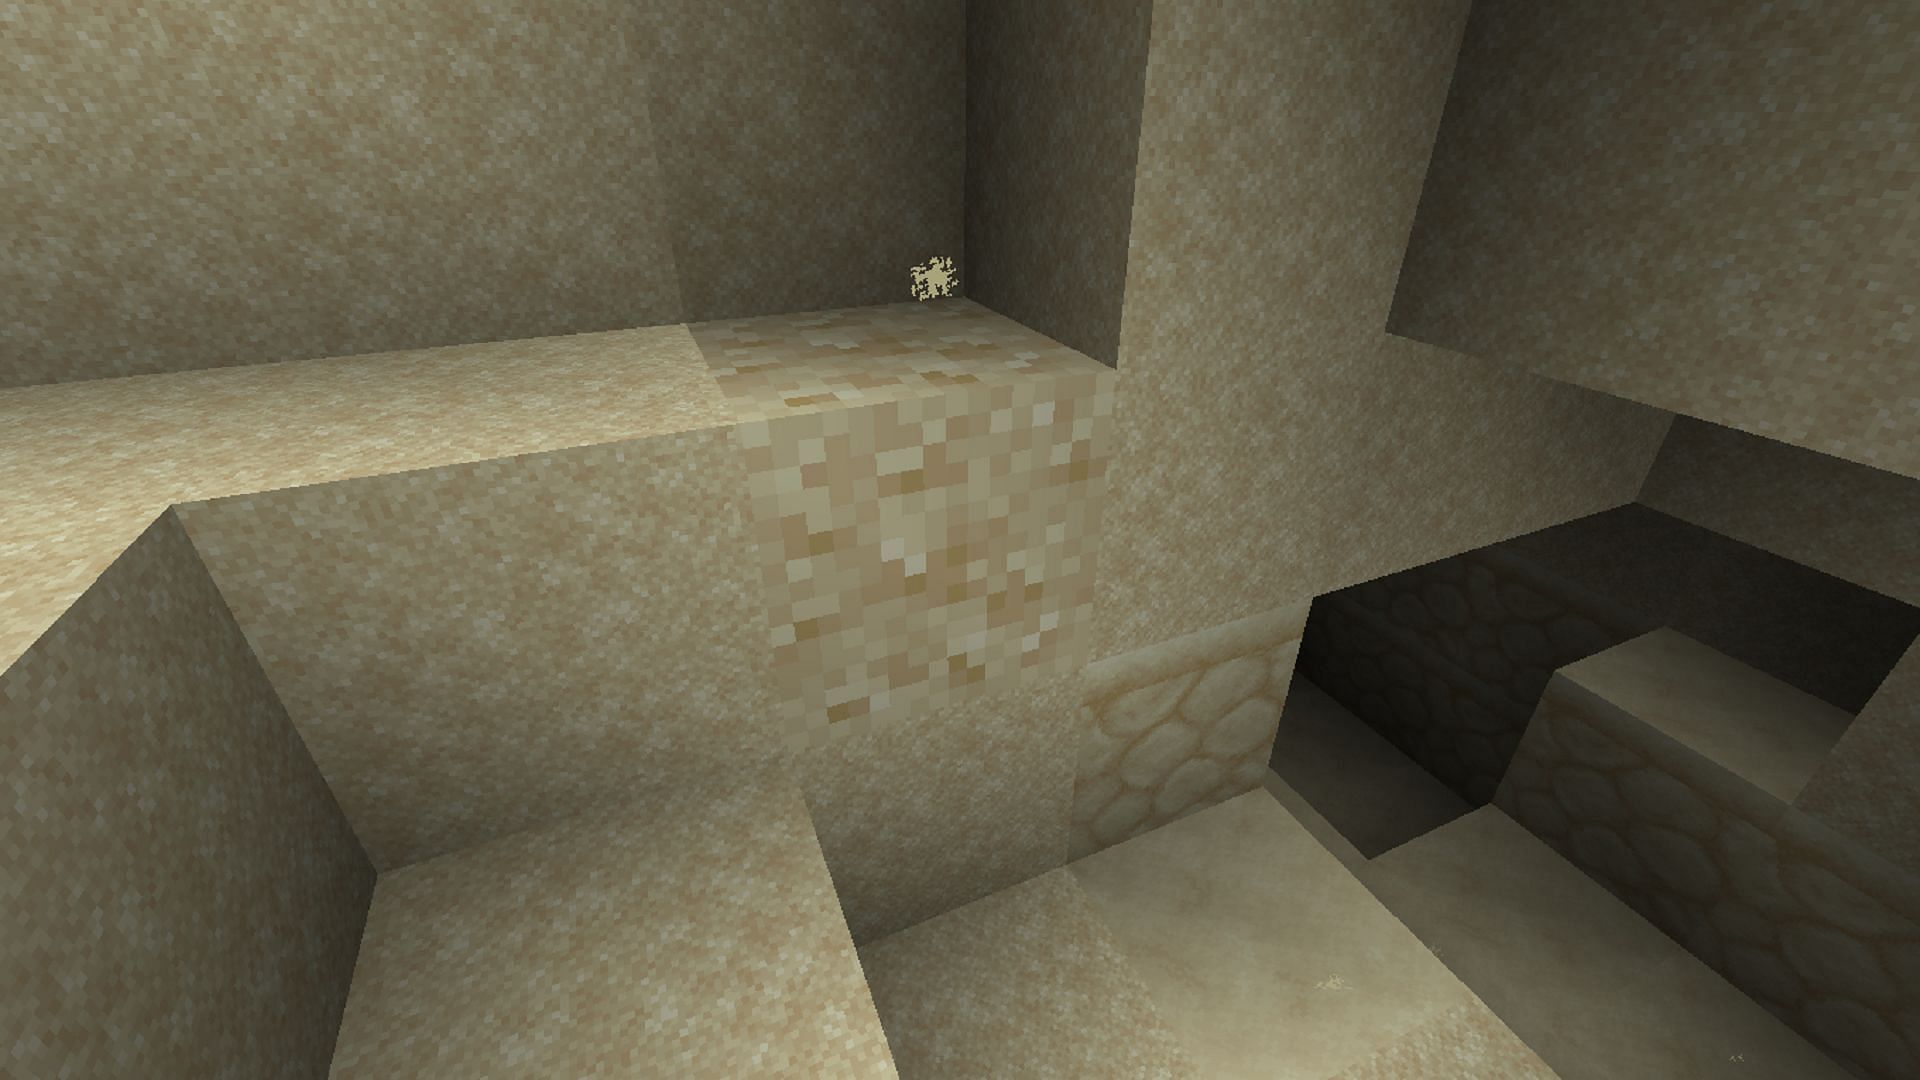 Suspicious sand is incredibly fragile in Minecraft, and players will need to exercise care around it (Image via Mojang)